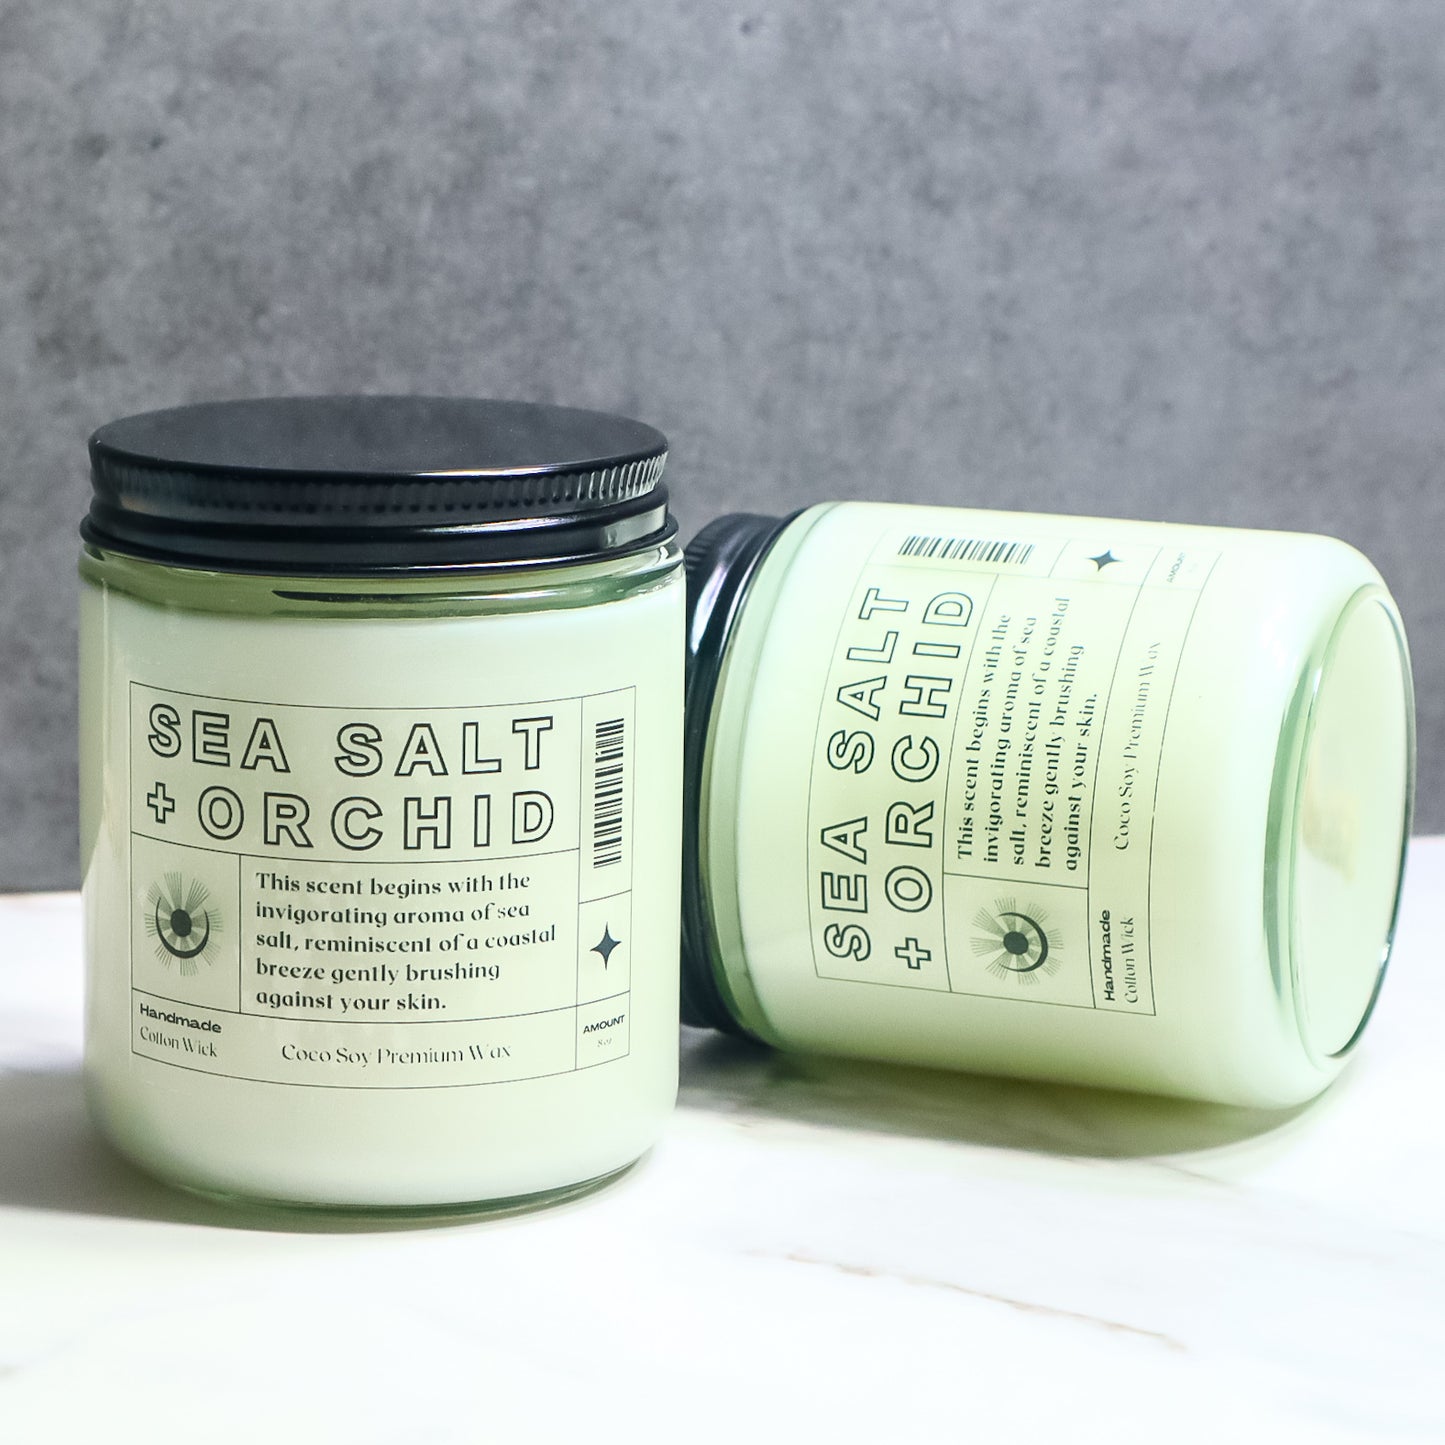 Sea Salt & Orchid Scented Coco Soy Candle